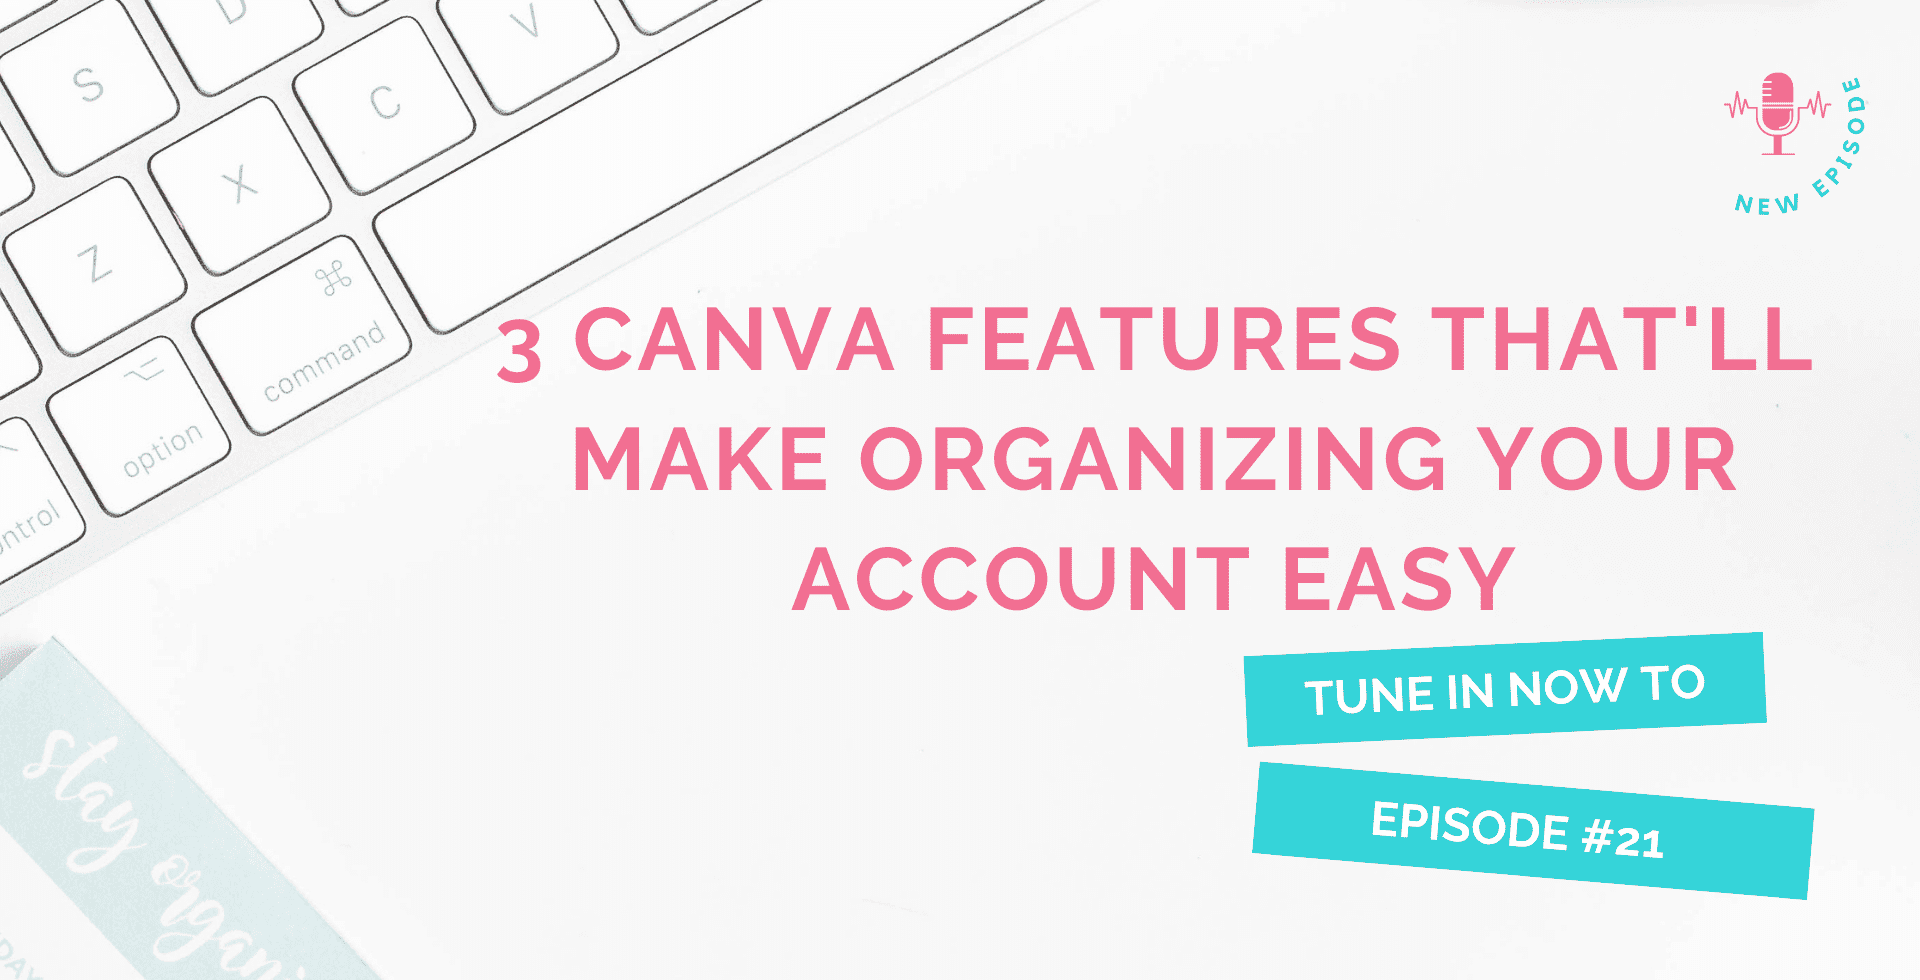 3 Canva Features That'll Make Organizing Your Account Easy podcast episode